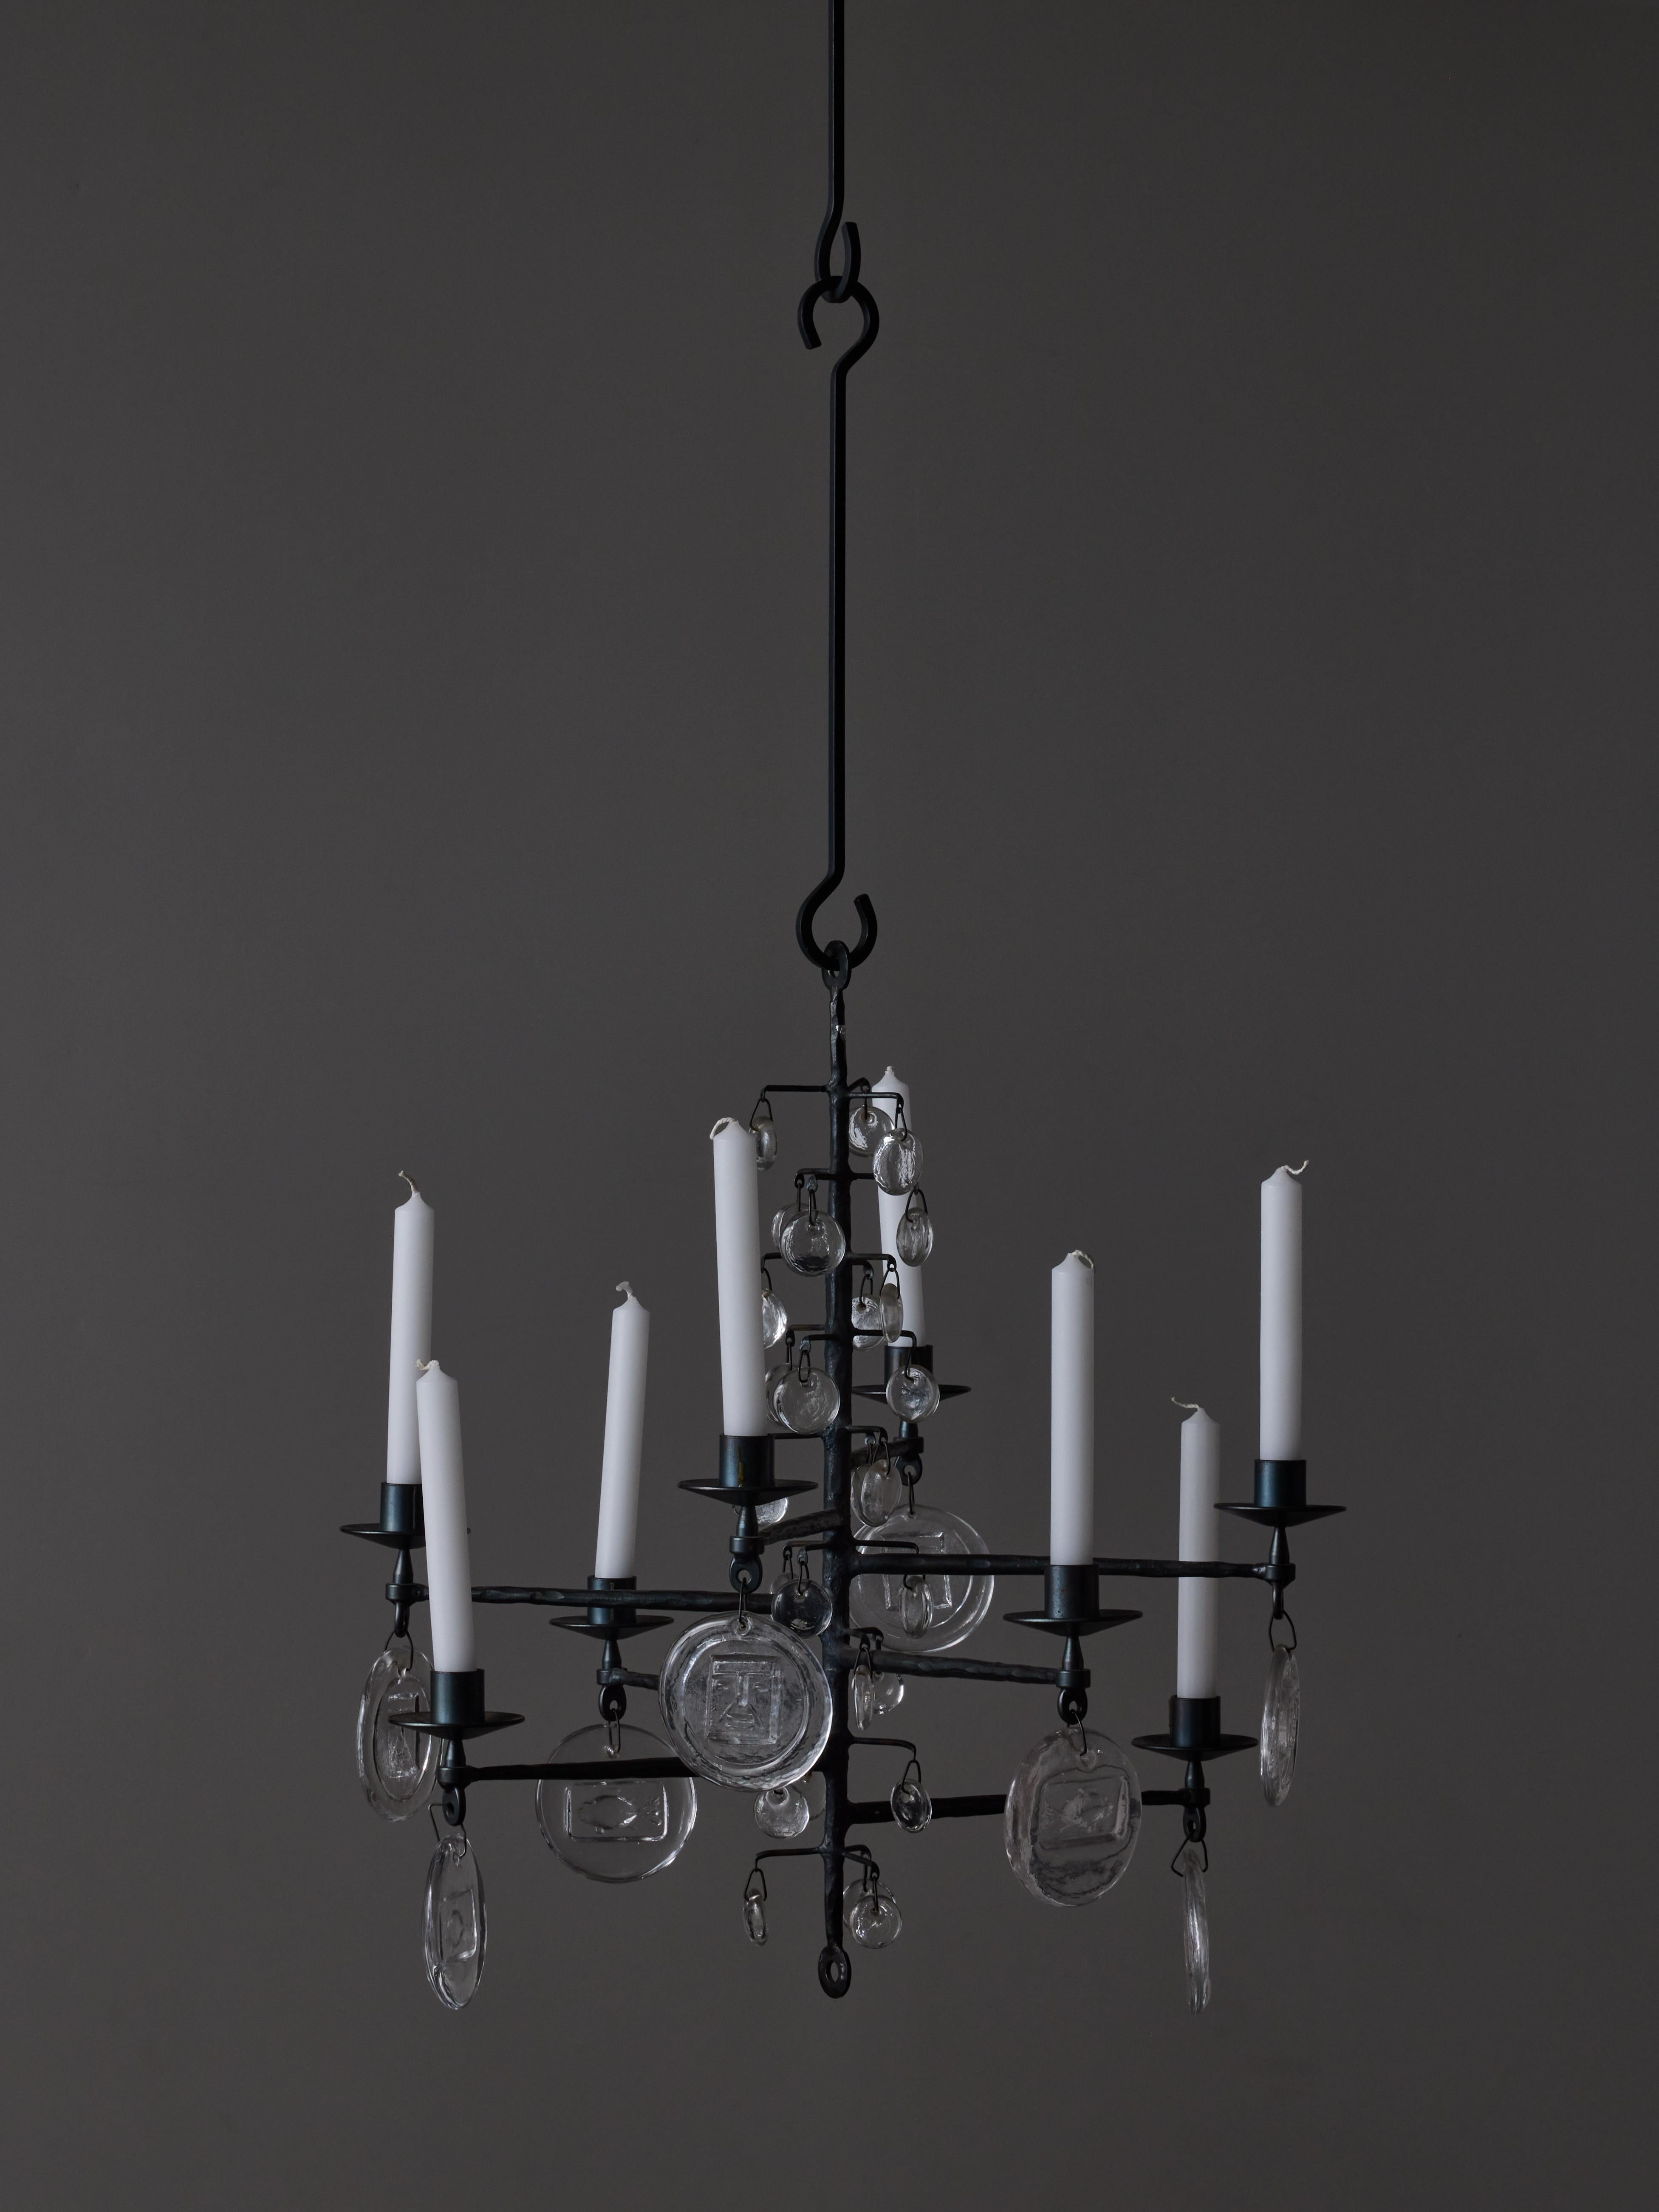 Classic example of Erik Höglund work is this rough iron chandelier made of eight arms of light from which hang glass tassels with various molded decors .
As always with the chandeliers from Höglund, this piece made by Kosta Boda isn't meant to be